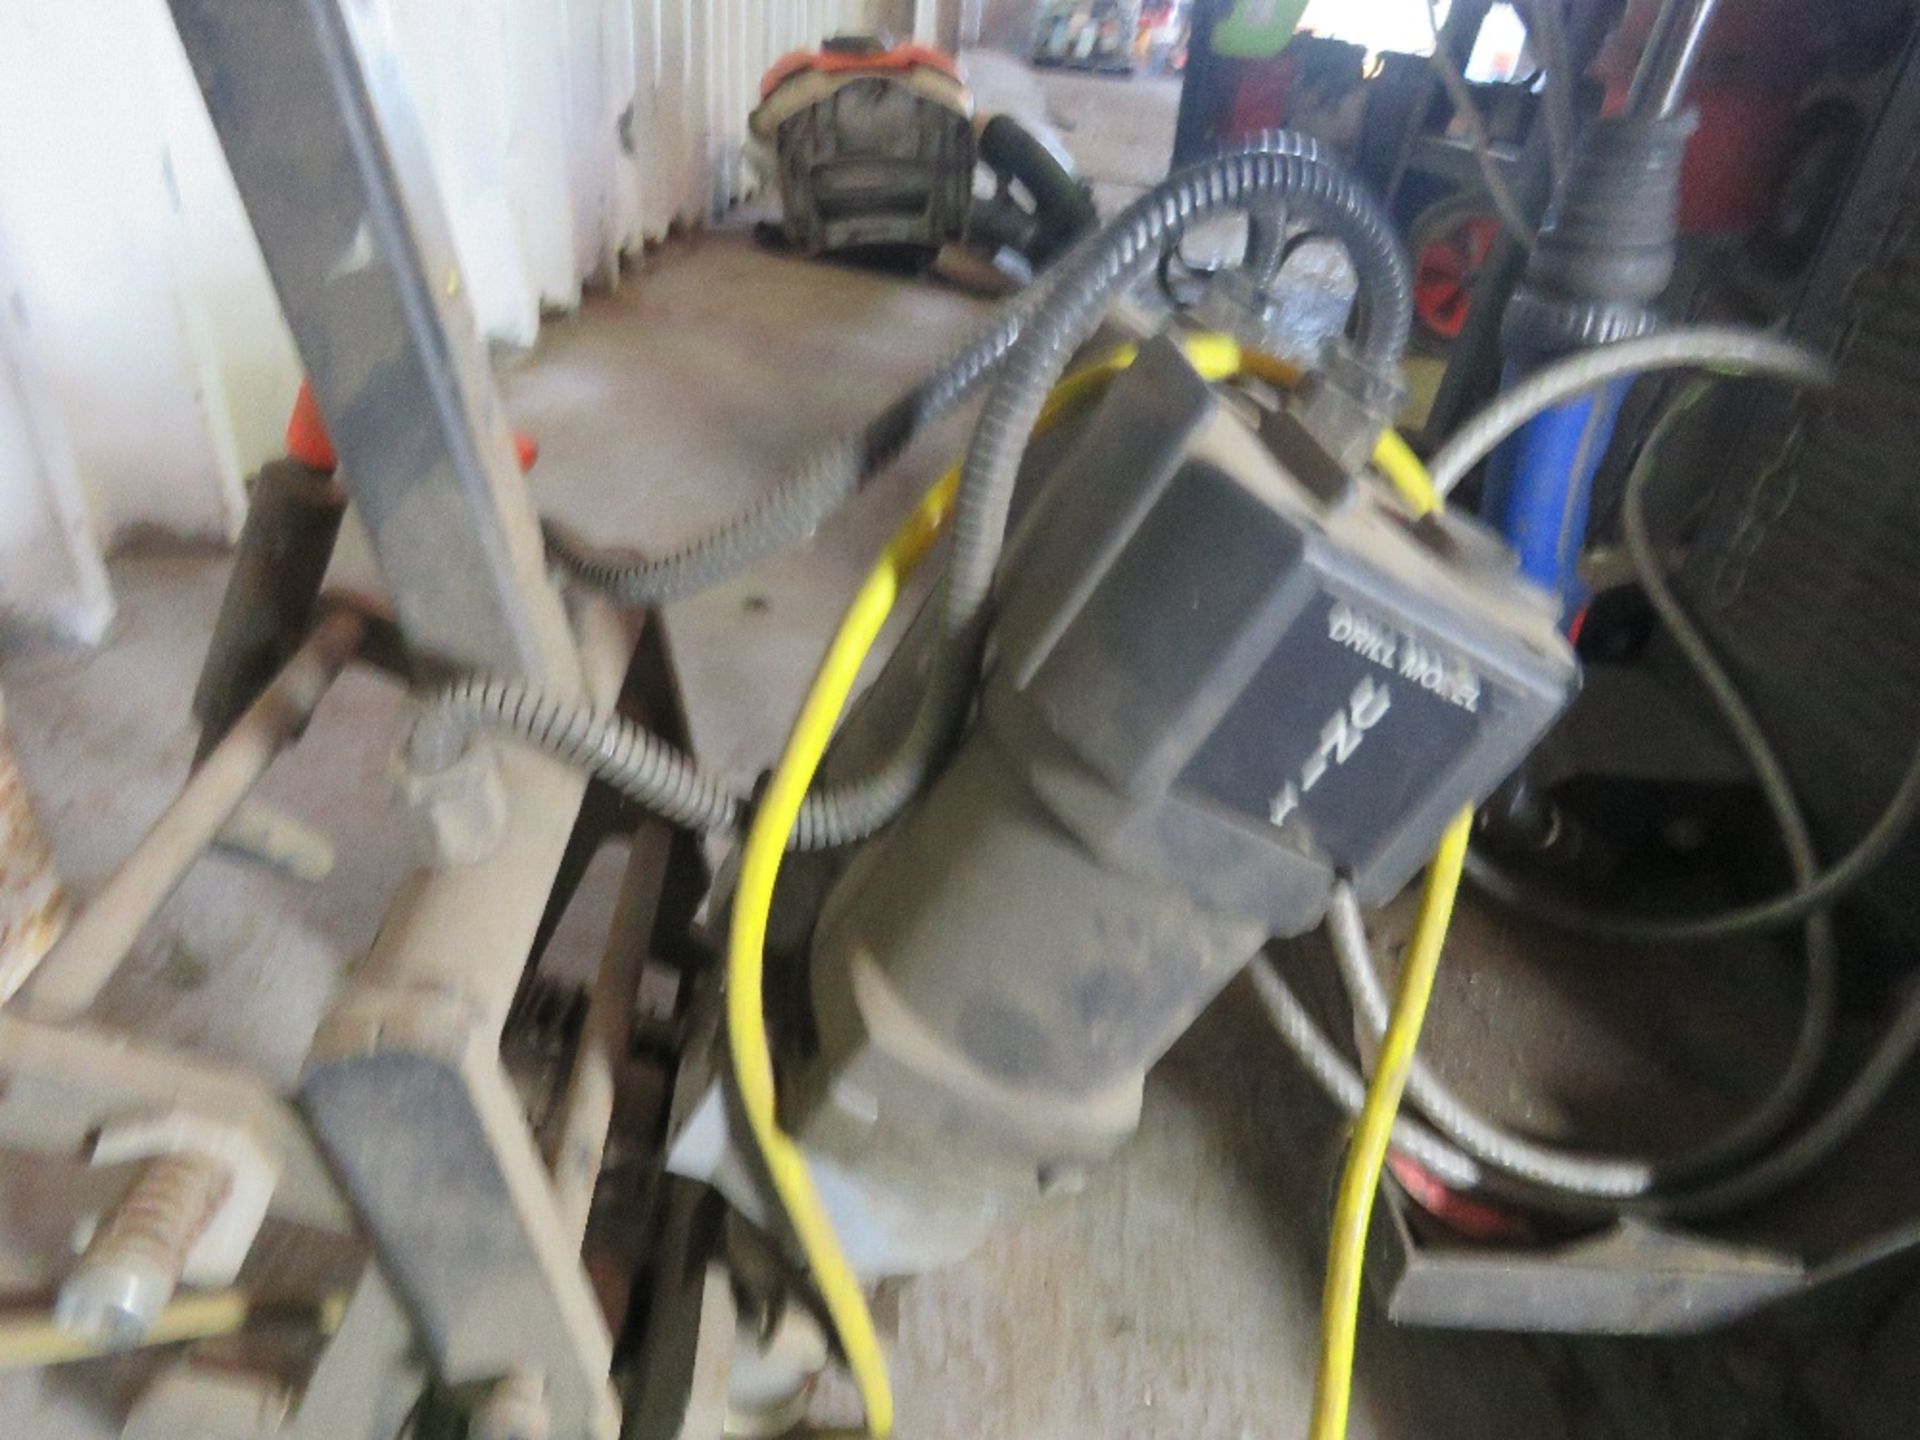 ROTOMAG TWIN HEADED BEAM/RAIL DRILL UNIT WITH CLAMP HEAD, 110VOLT. - Image 2 of 5